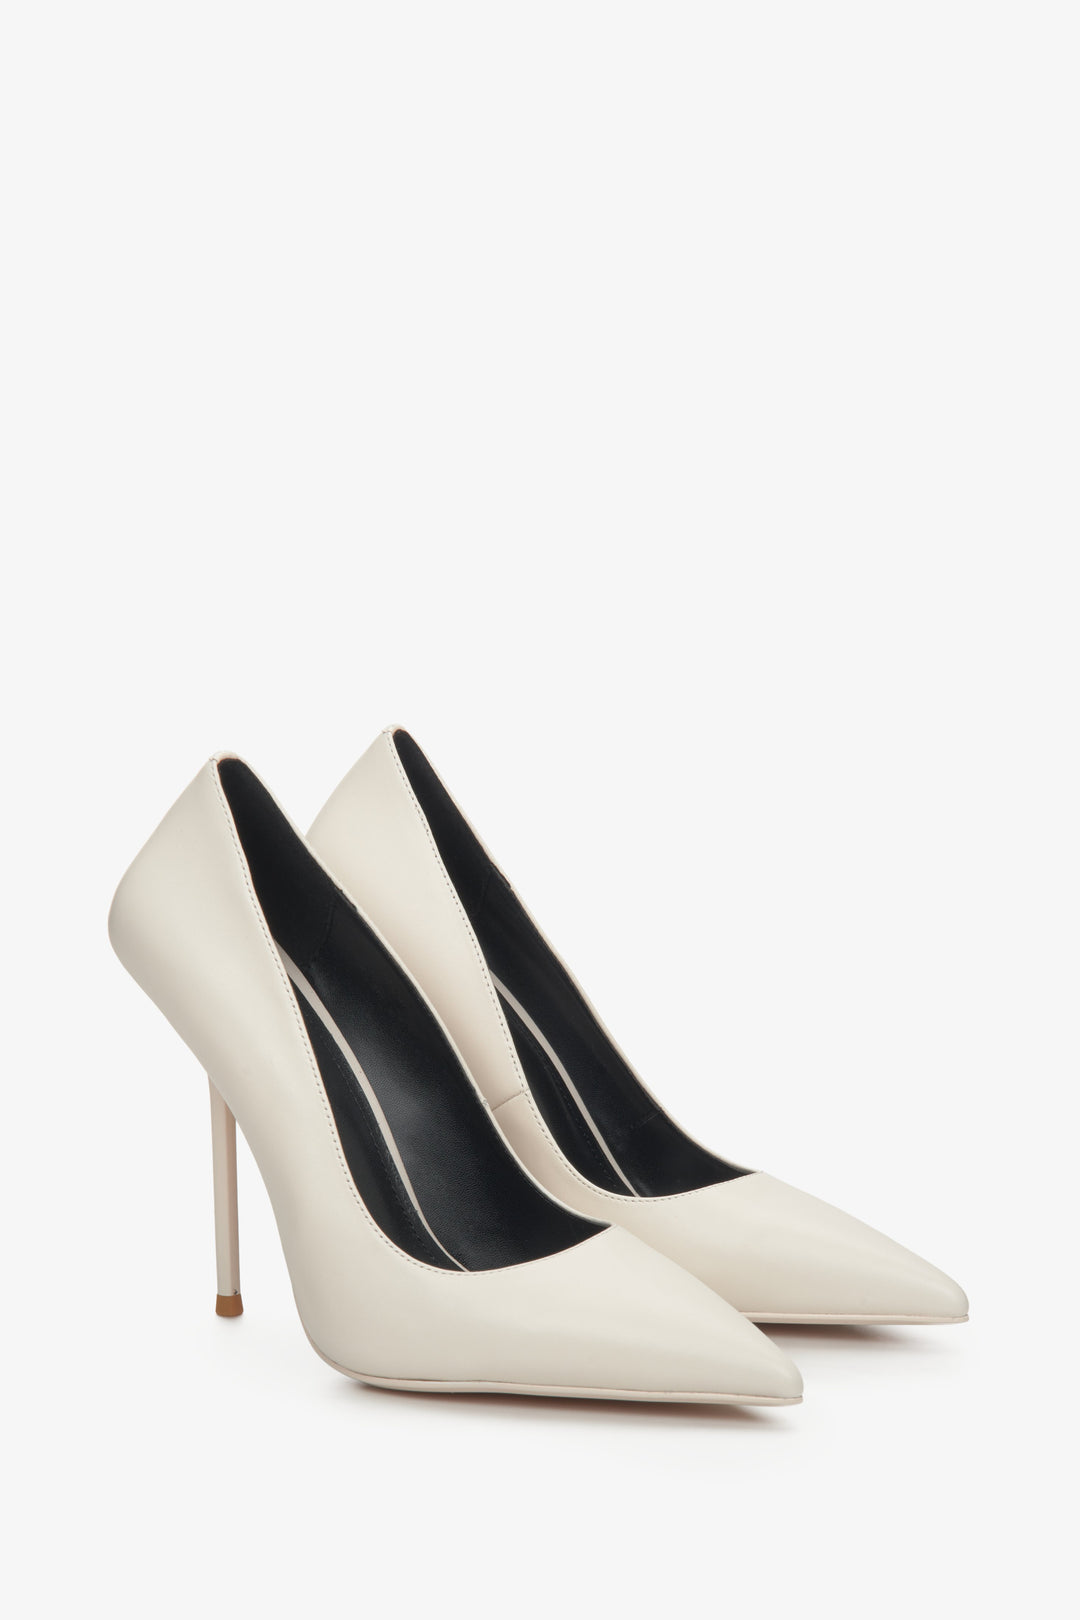 Women's white leather stiletto heels with a pointed toe.